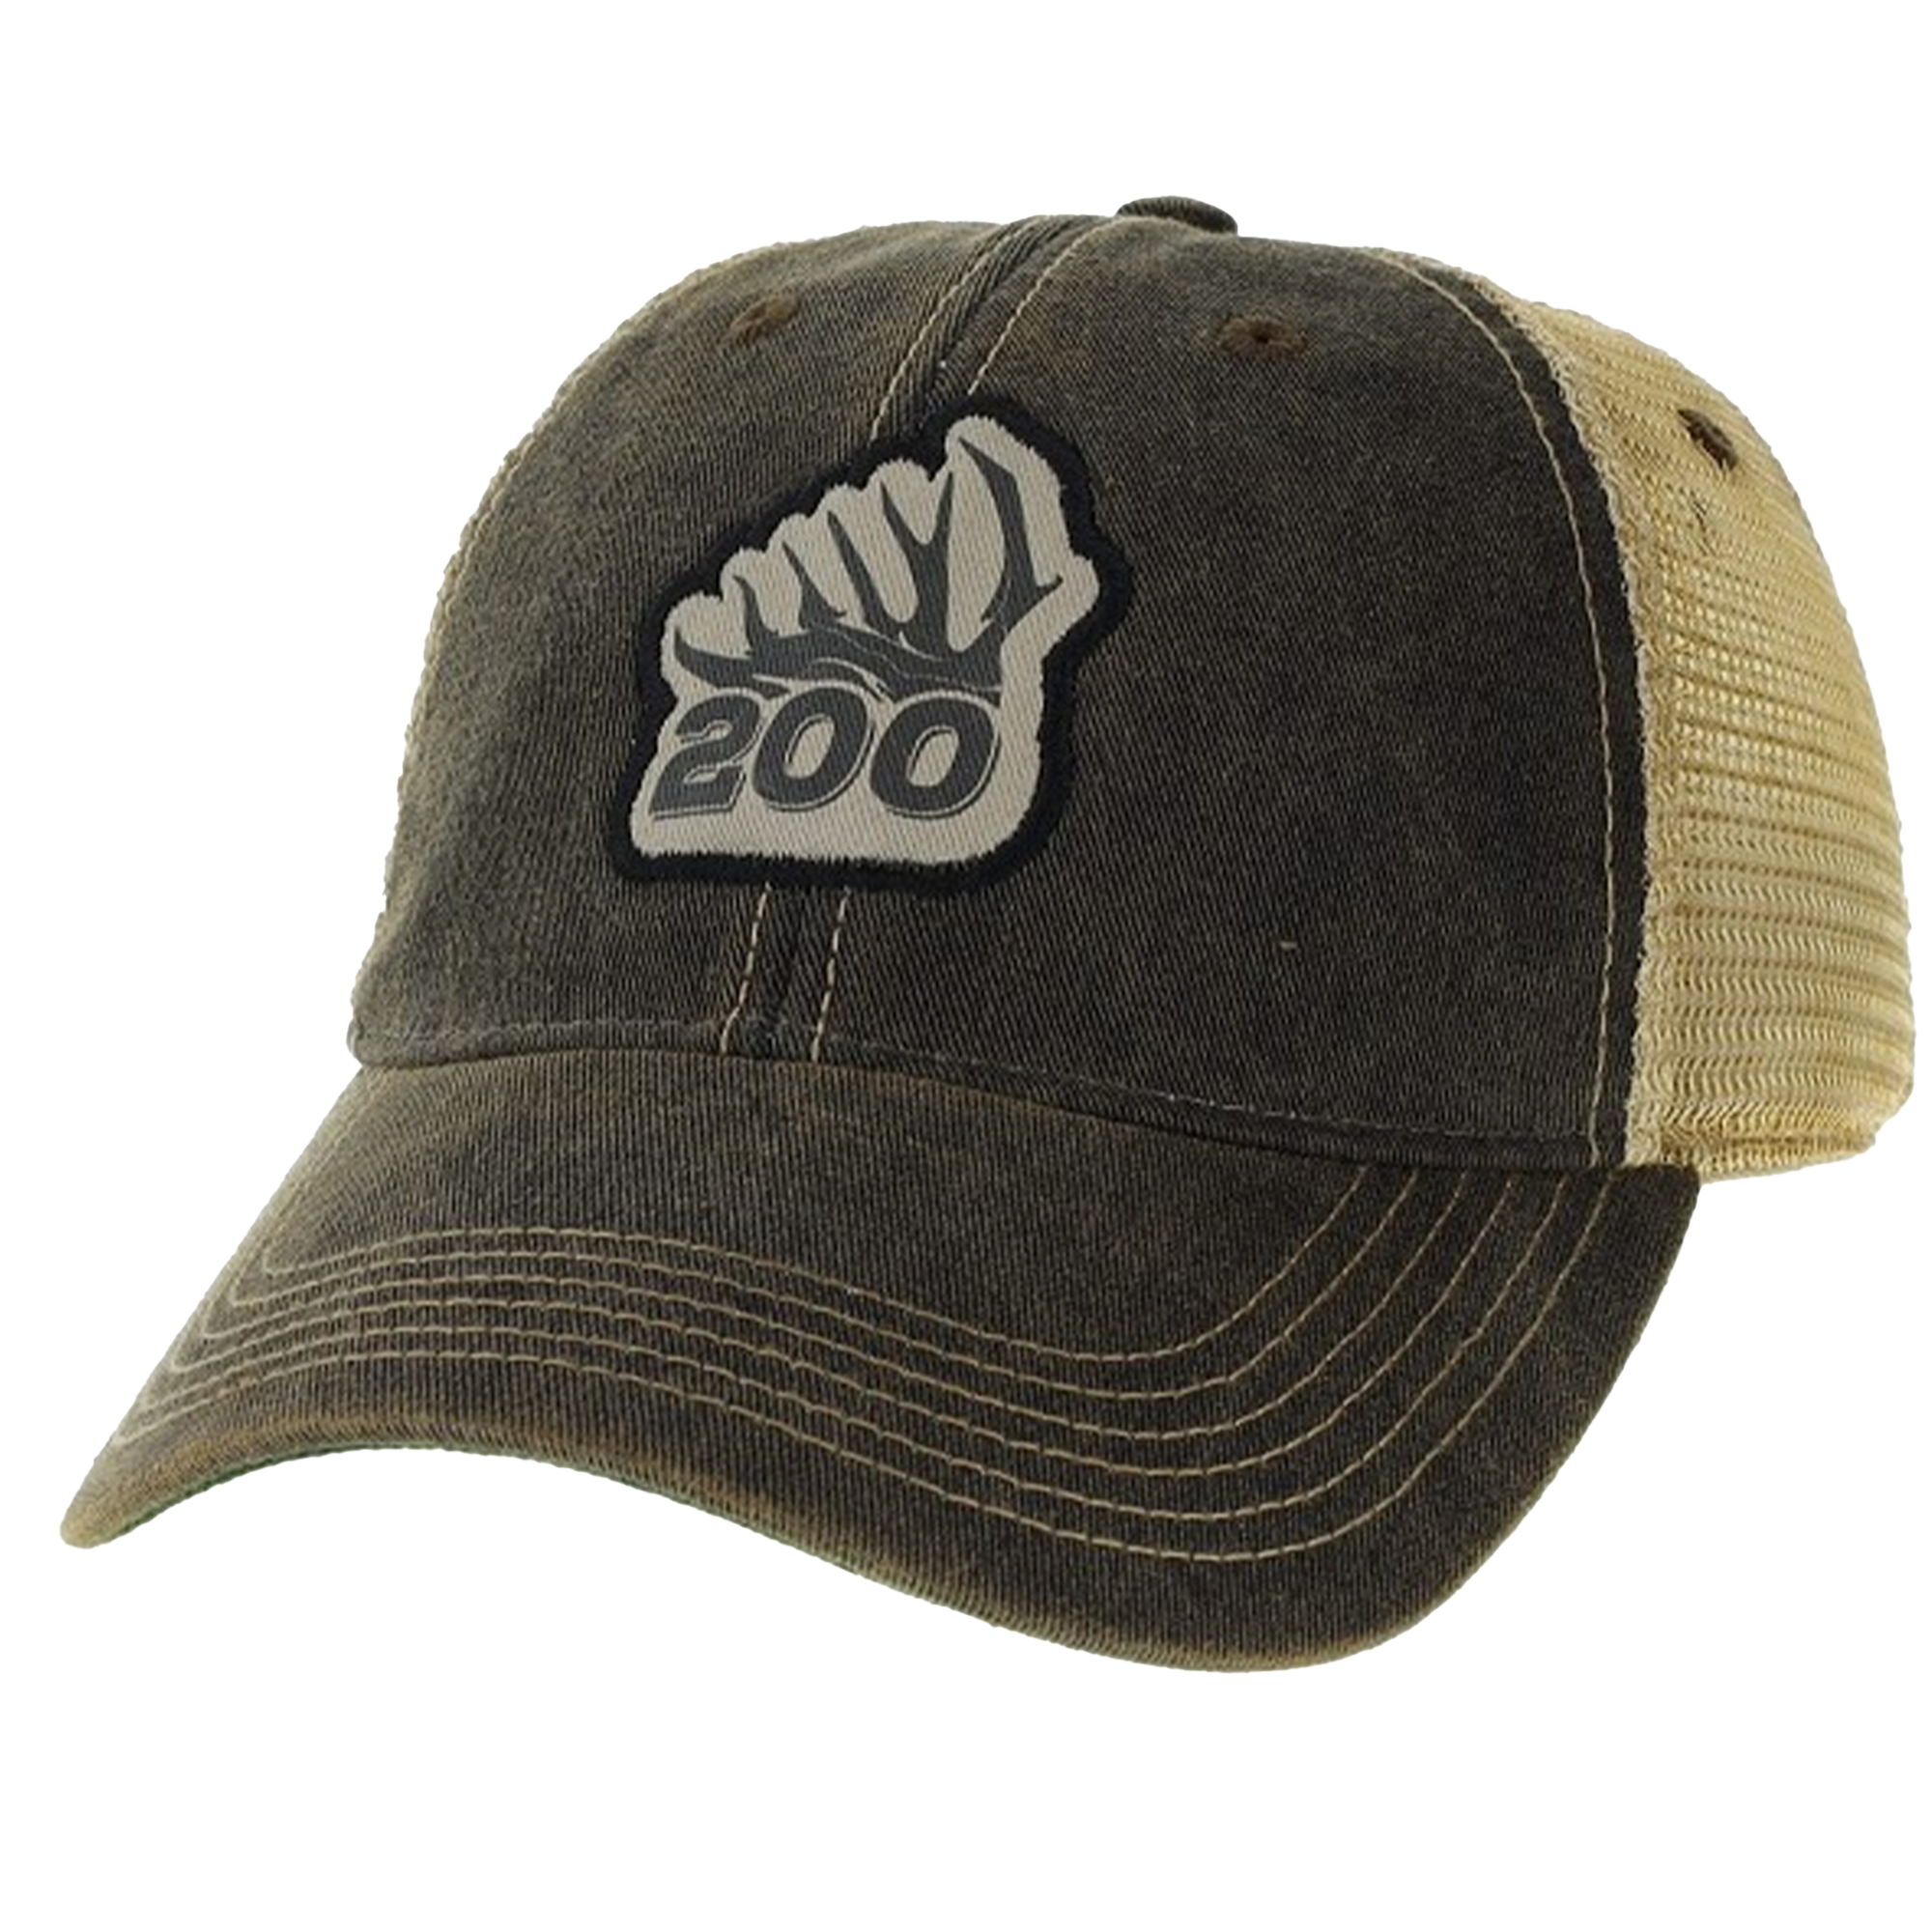 200 Faded Black - Tan mesh hat with 200 patch.